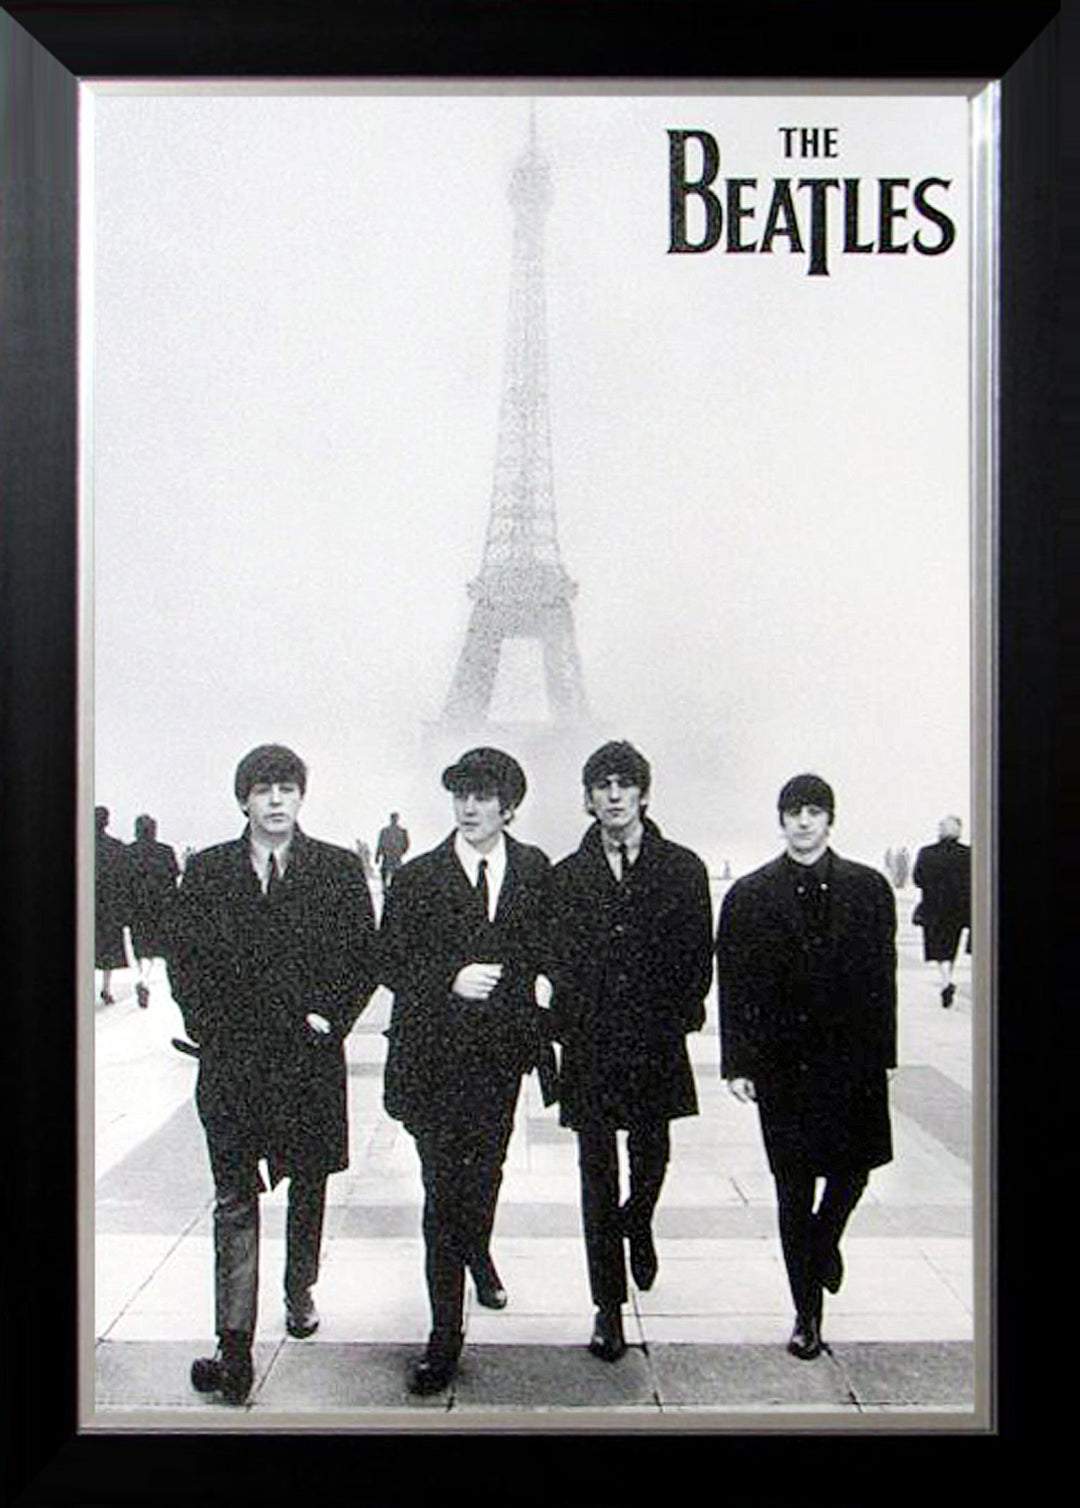 The Beatles At The Eiffel Tower - Framed Canvas Reprint , The Beatles, Pop Culture Art, Music, Collectibile Memorabilia, AAAPM32456